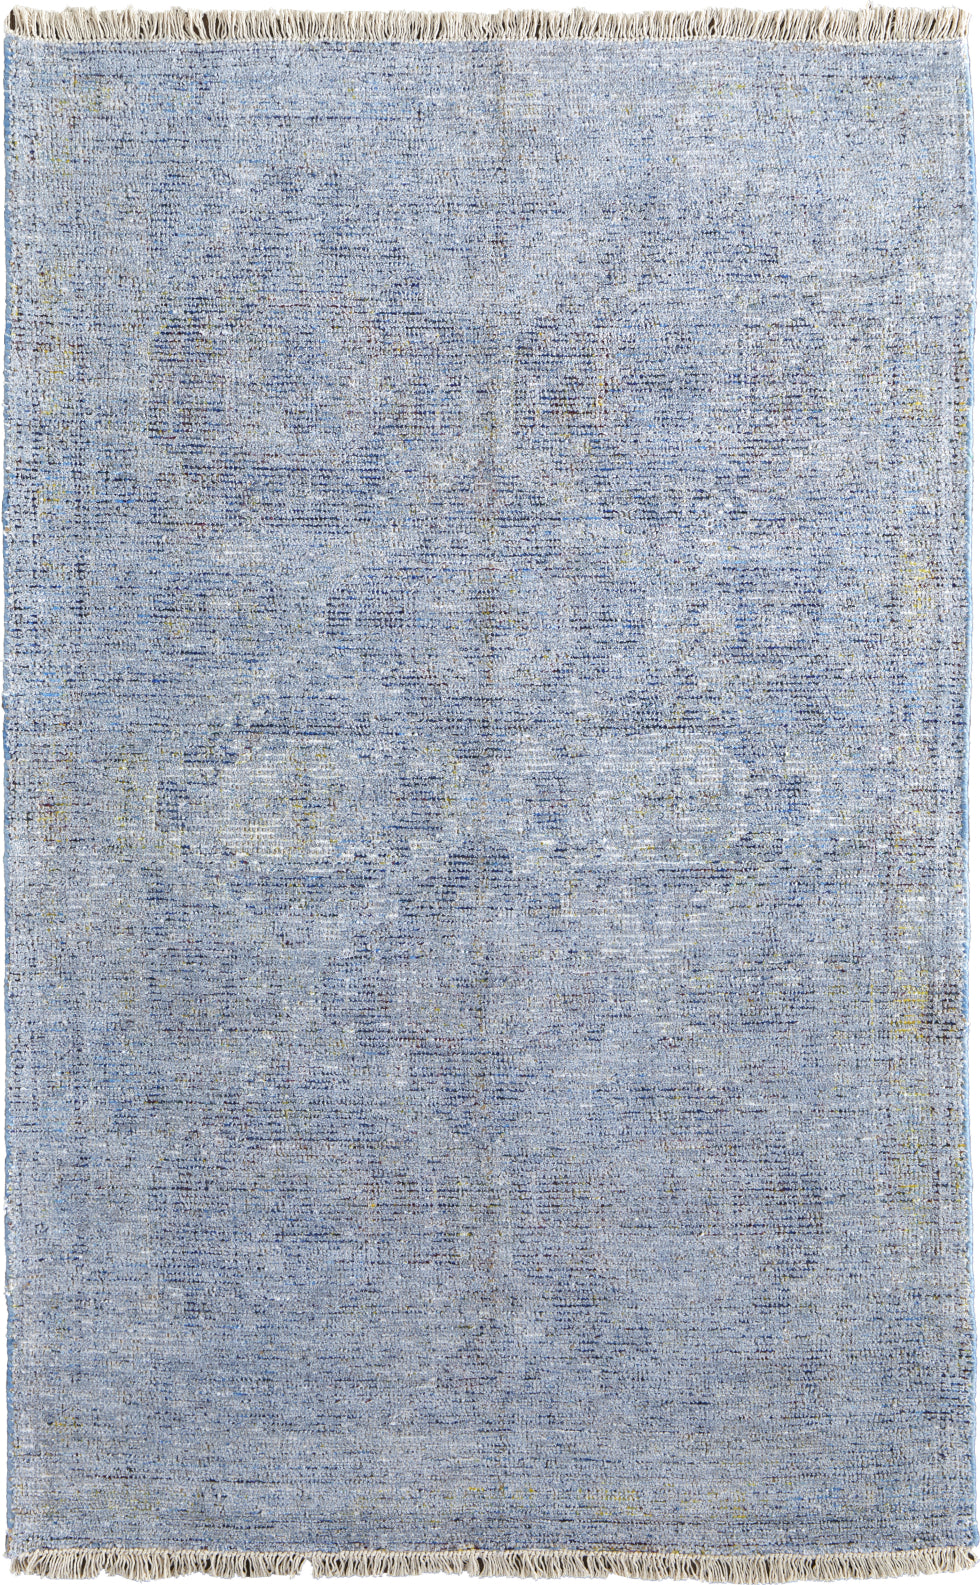 Feizy Caldwell 8804F Blue/Beige Area Rug main image